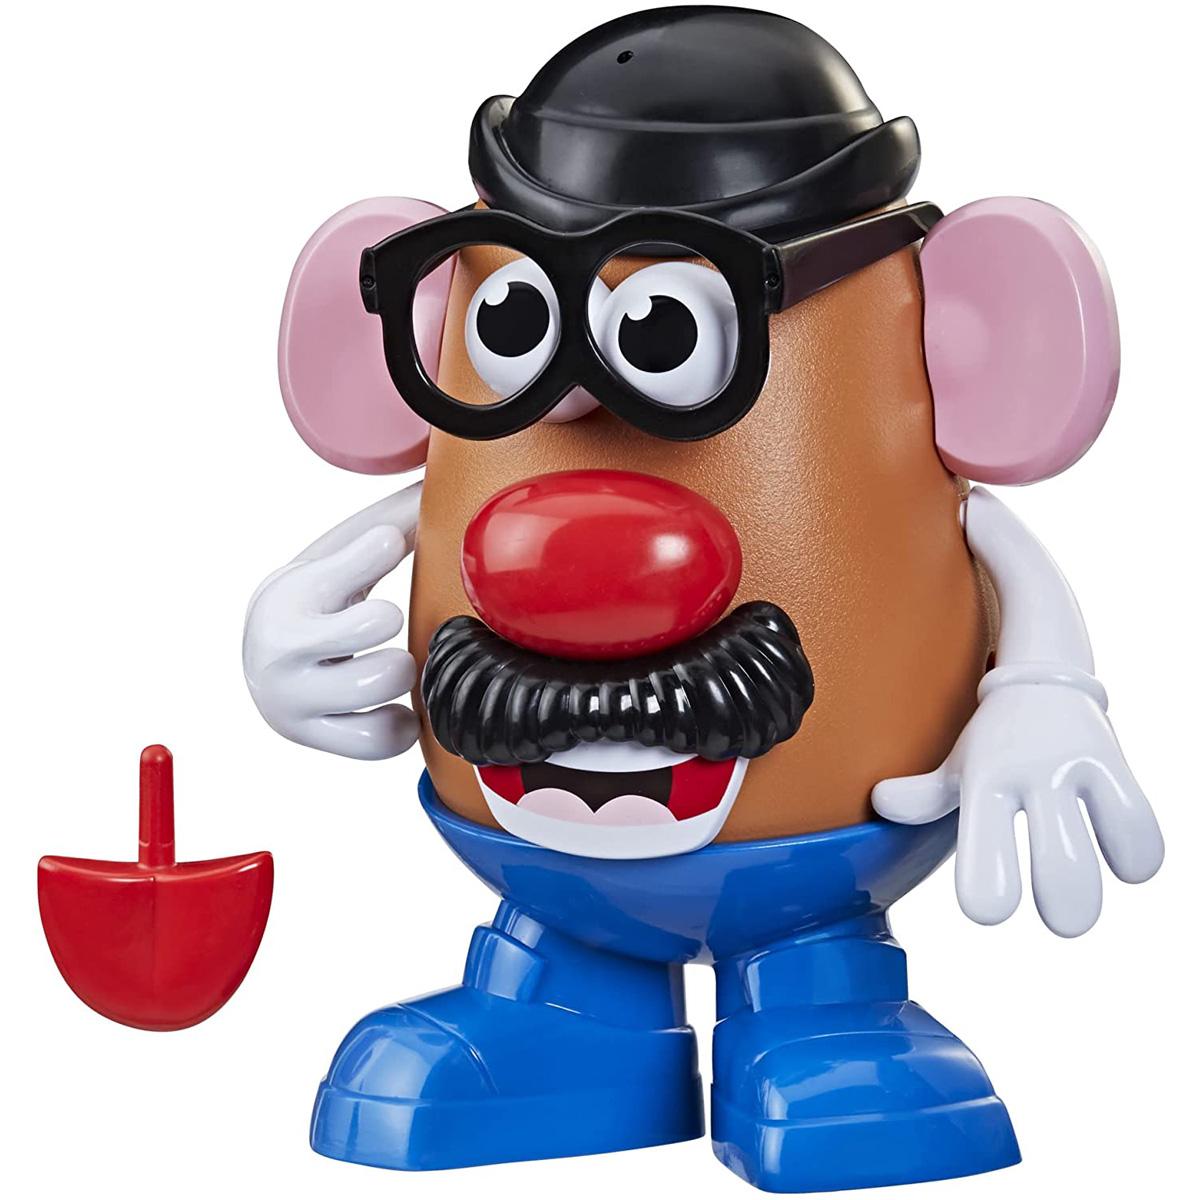 Mr or Mrs Potato Head Toy for $4.99